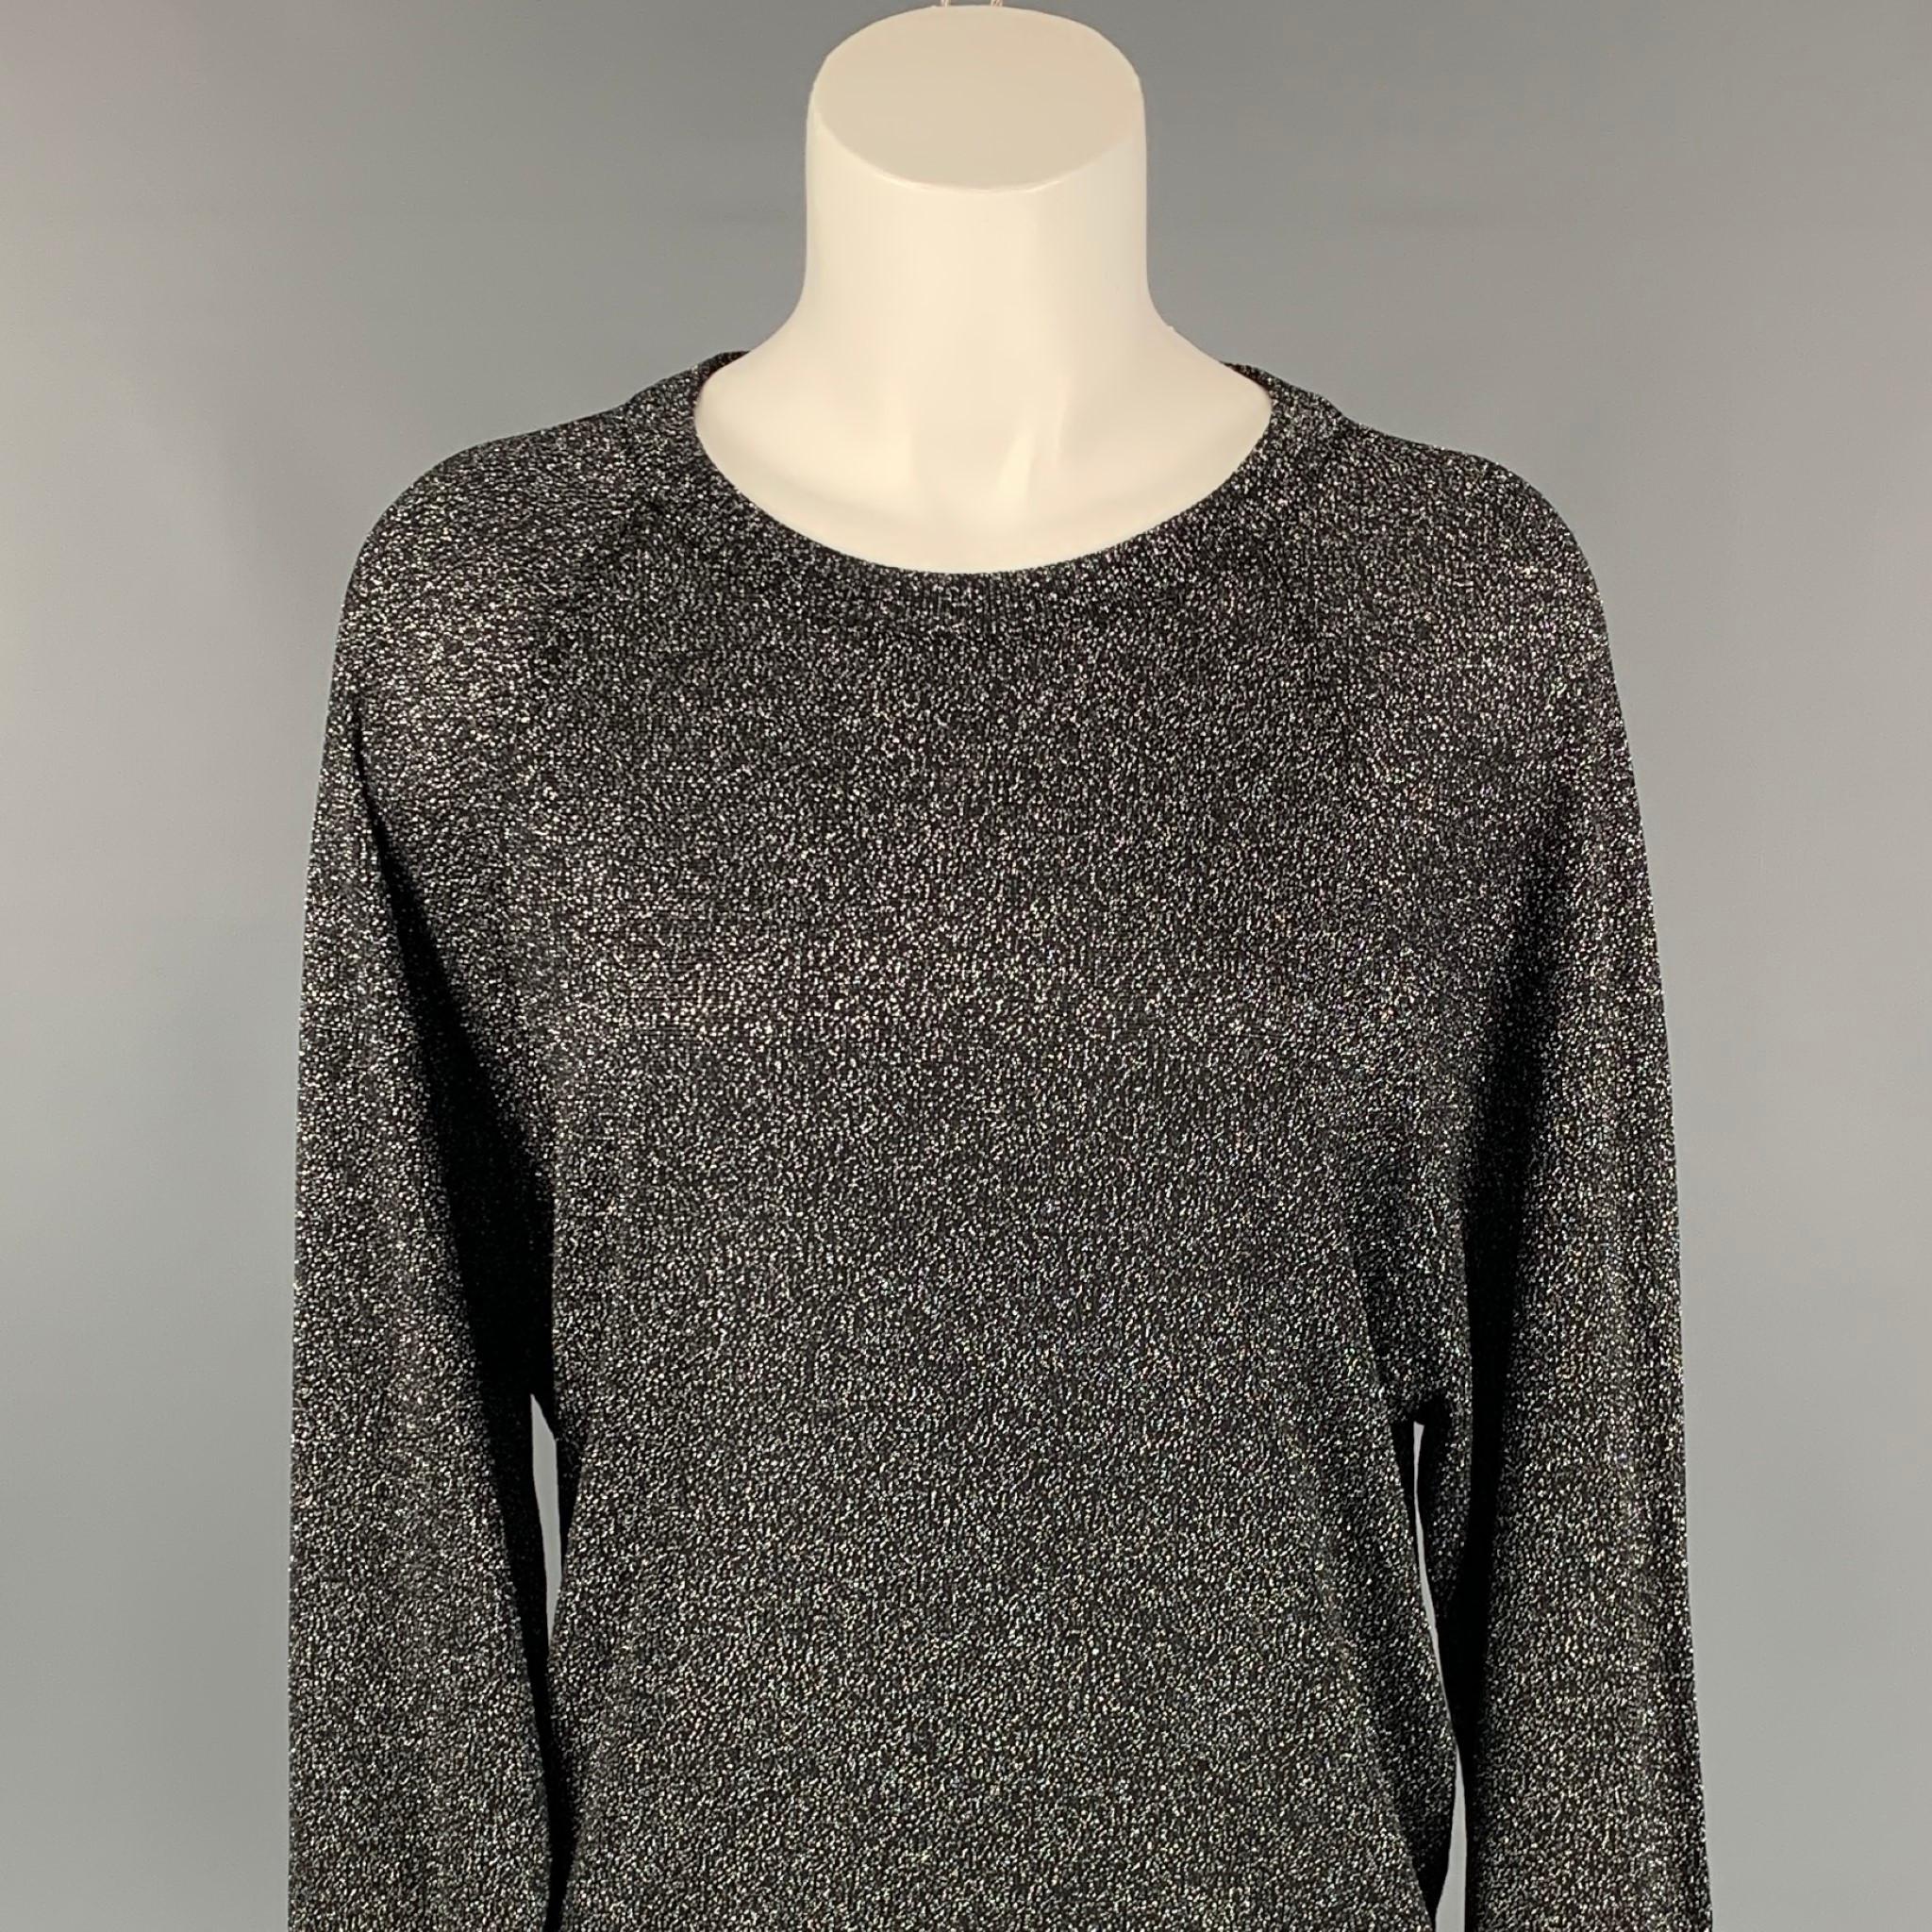 MICHAEL KORS COLLECTION pullover comes in a black & silver metallic acetate blend featuring a loose fit and a crew-neck. 

Very Good Pre-Owned Condition.
Marked: XS

Measurements:

Shoulder: 16 in.
Bust: 40 in.
Sleeve: 26 in.
Length: 26 in. 